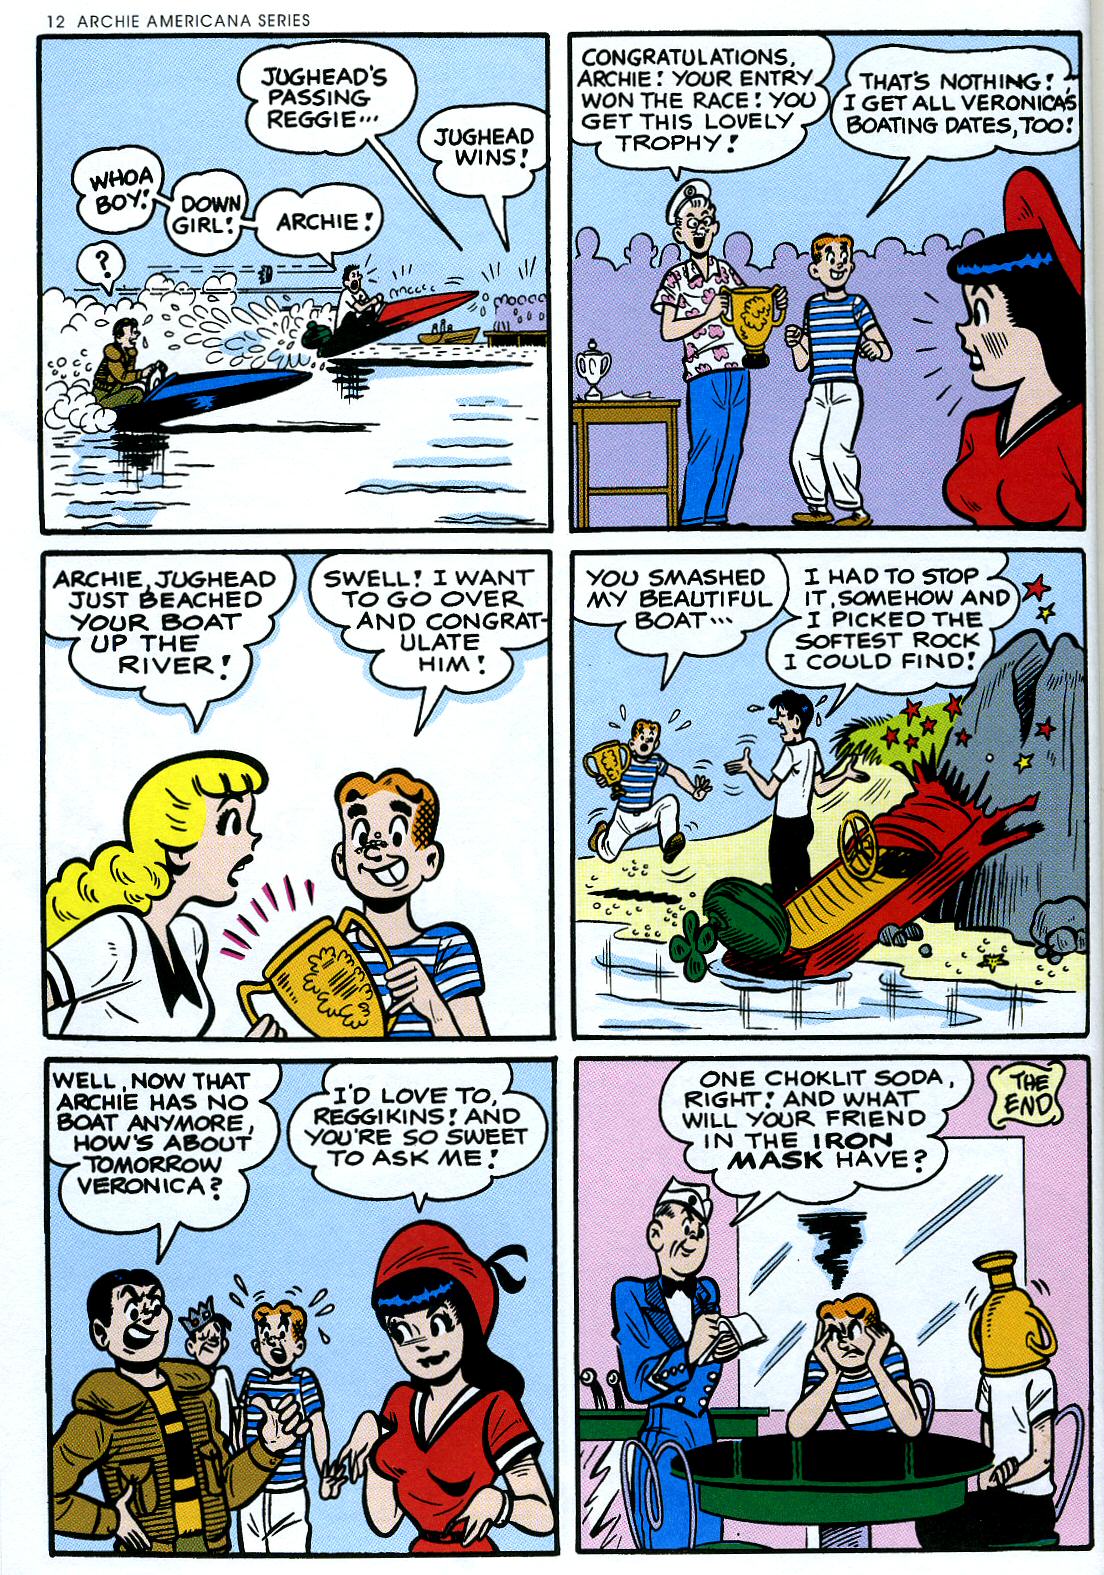 Read online Archie Americana Series comic -  Issue # TPB 2 - 14